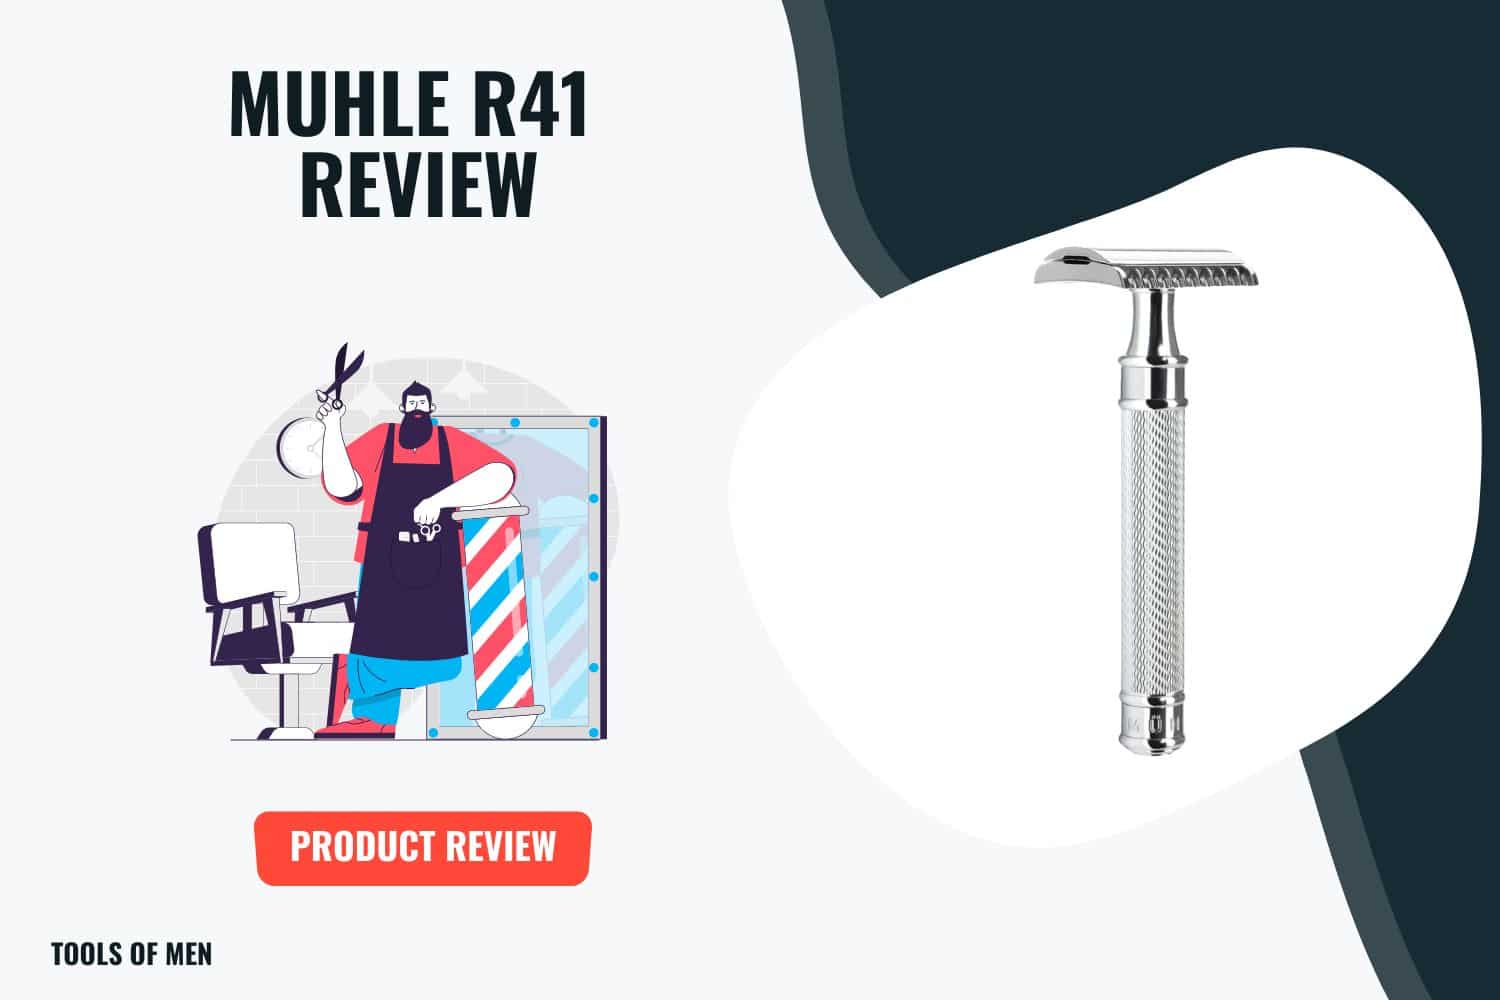 muhle r41 feature image